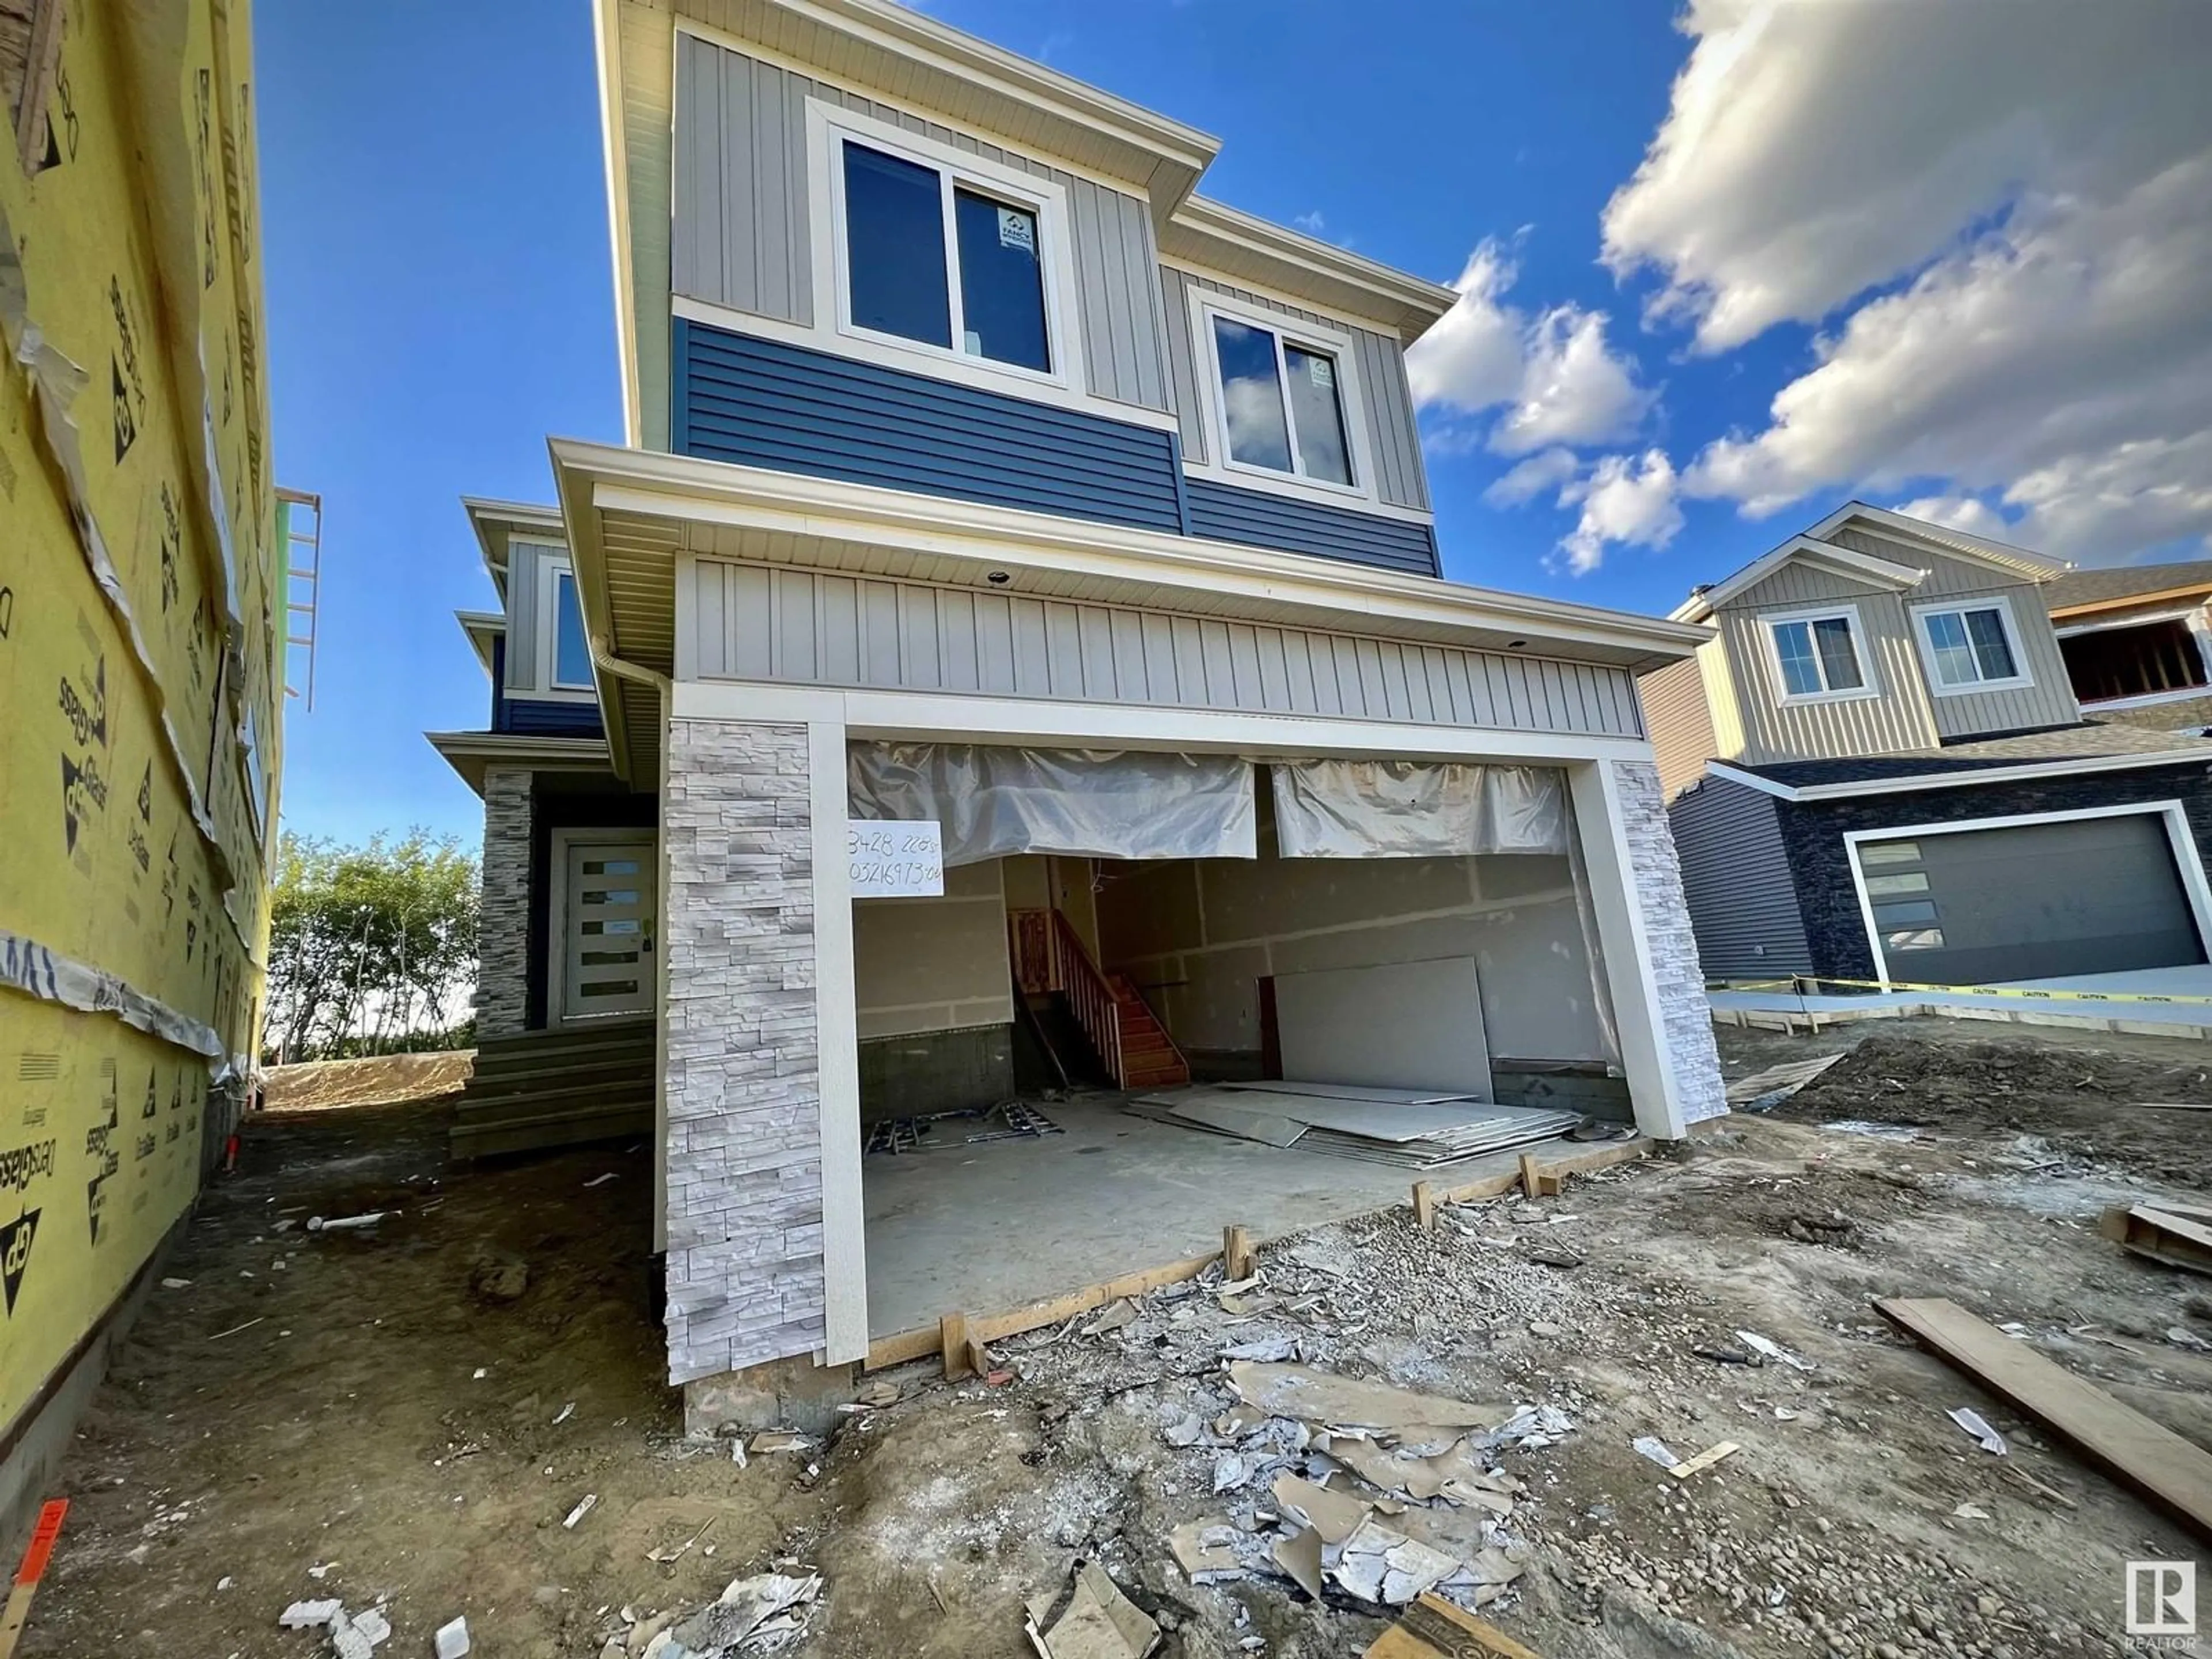 A pic from exterior of the house or condo for 8428 228 ST NW, Edmonton Alberta T5T4B4